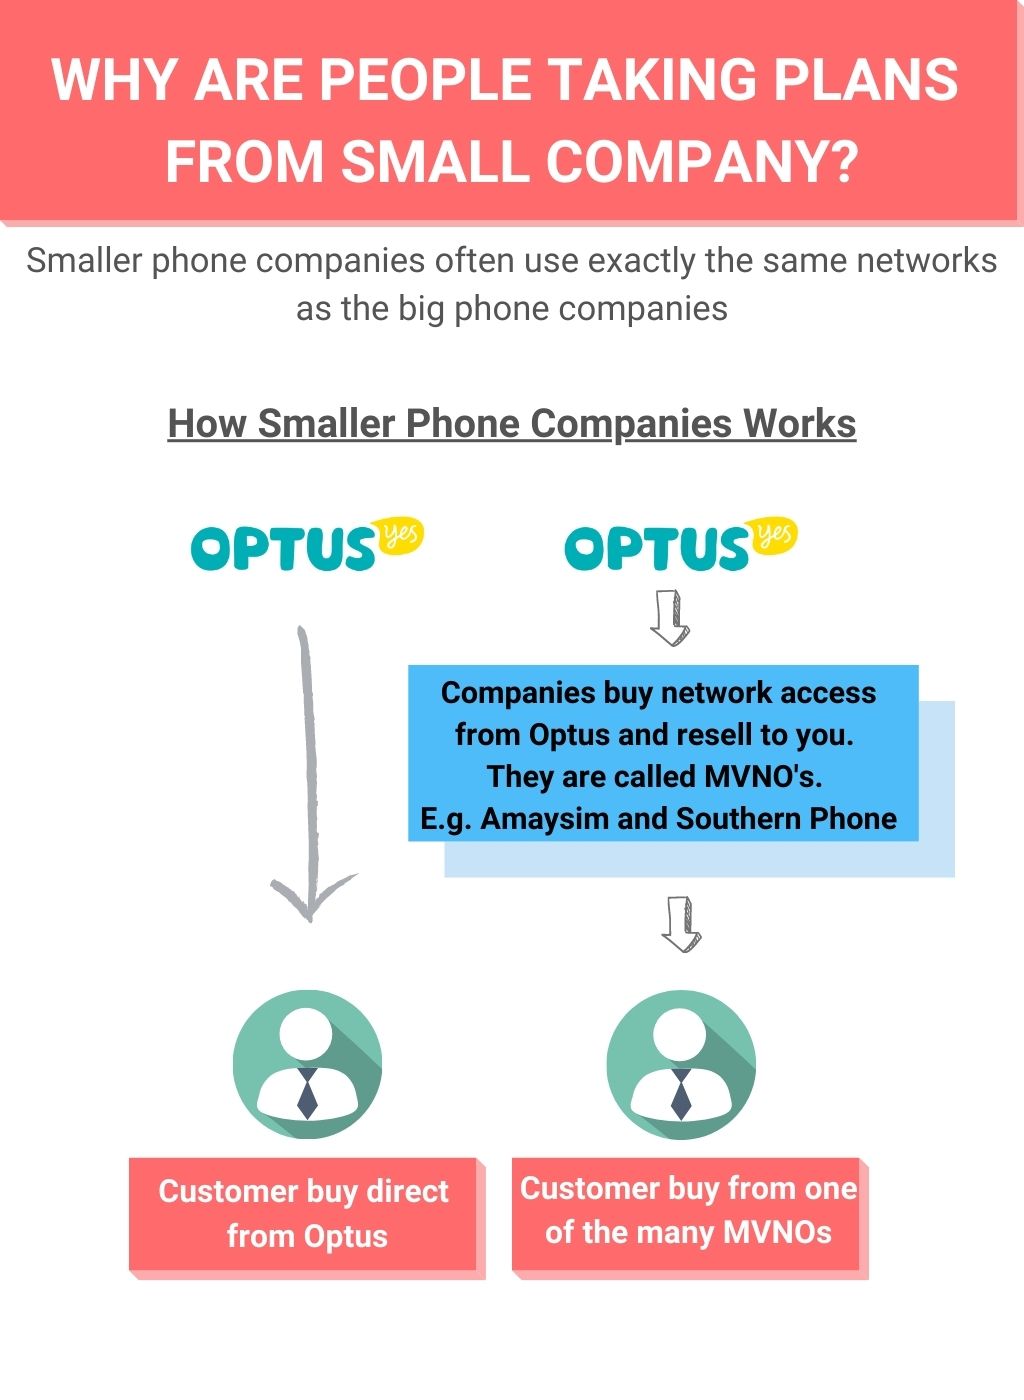 You’ll get exactly the same network coverage, data speeds and voice calls if you go with an Optus reseller or Optus themselves.